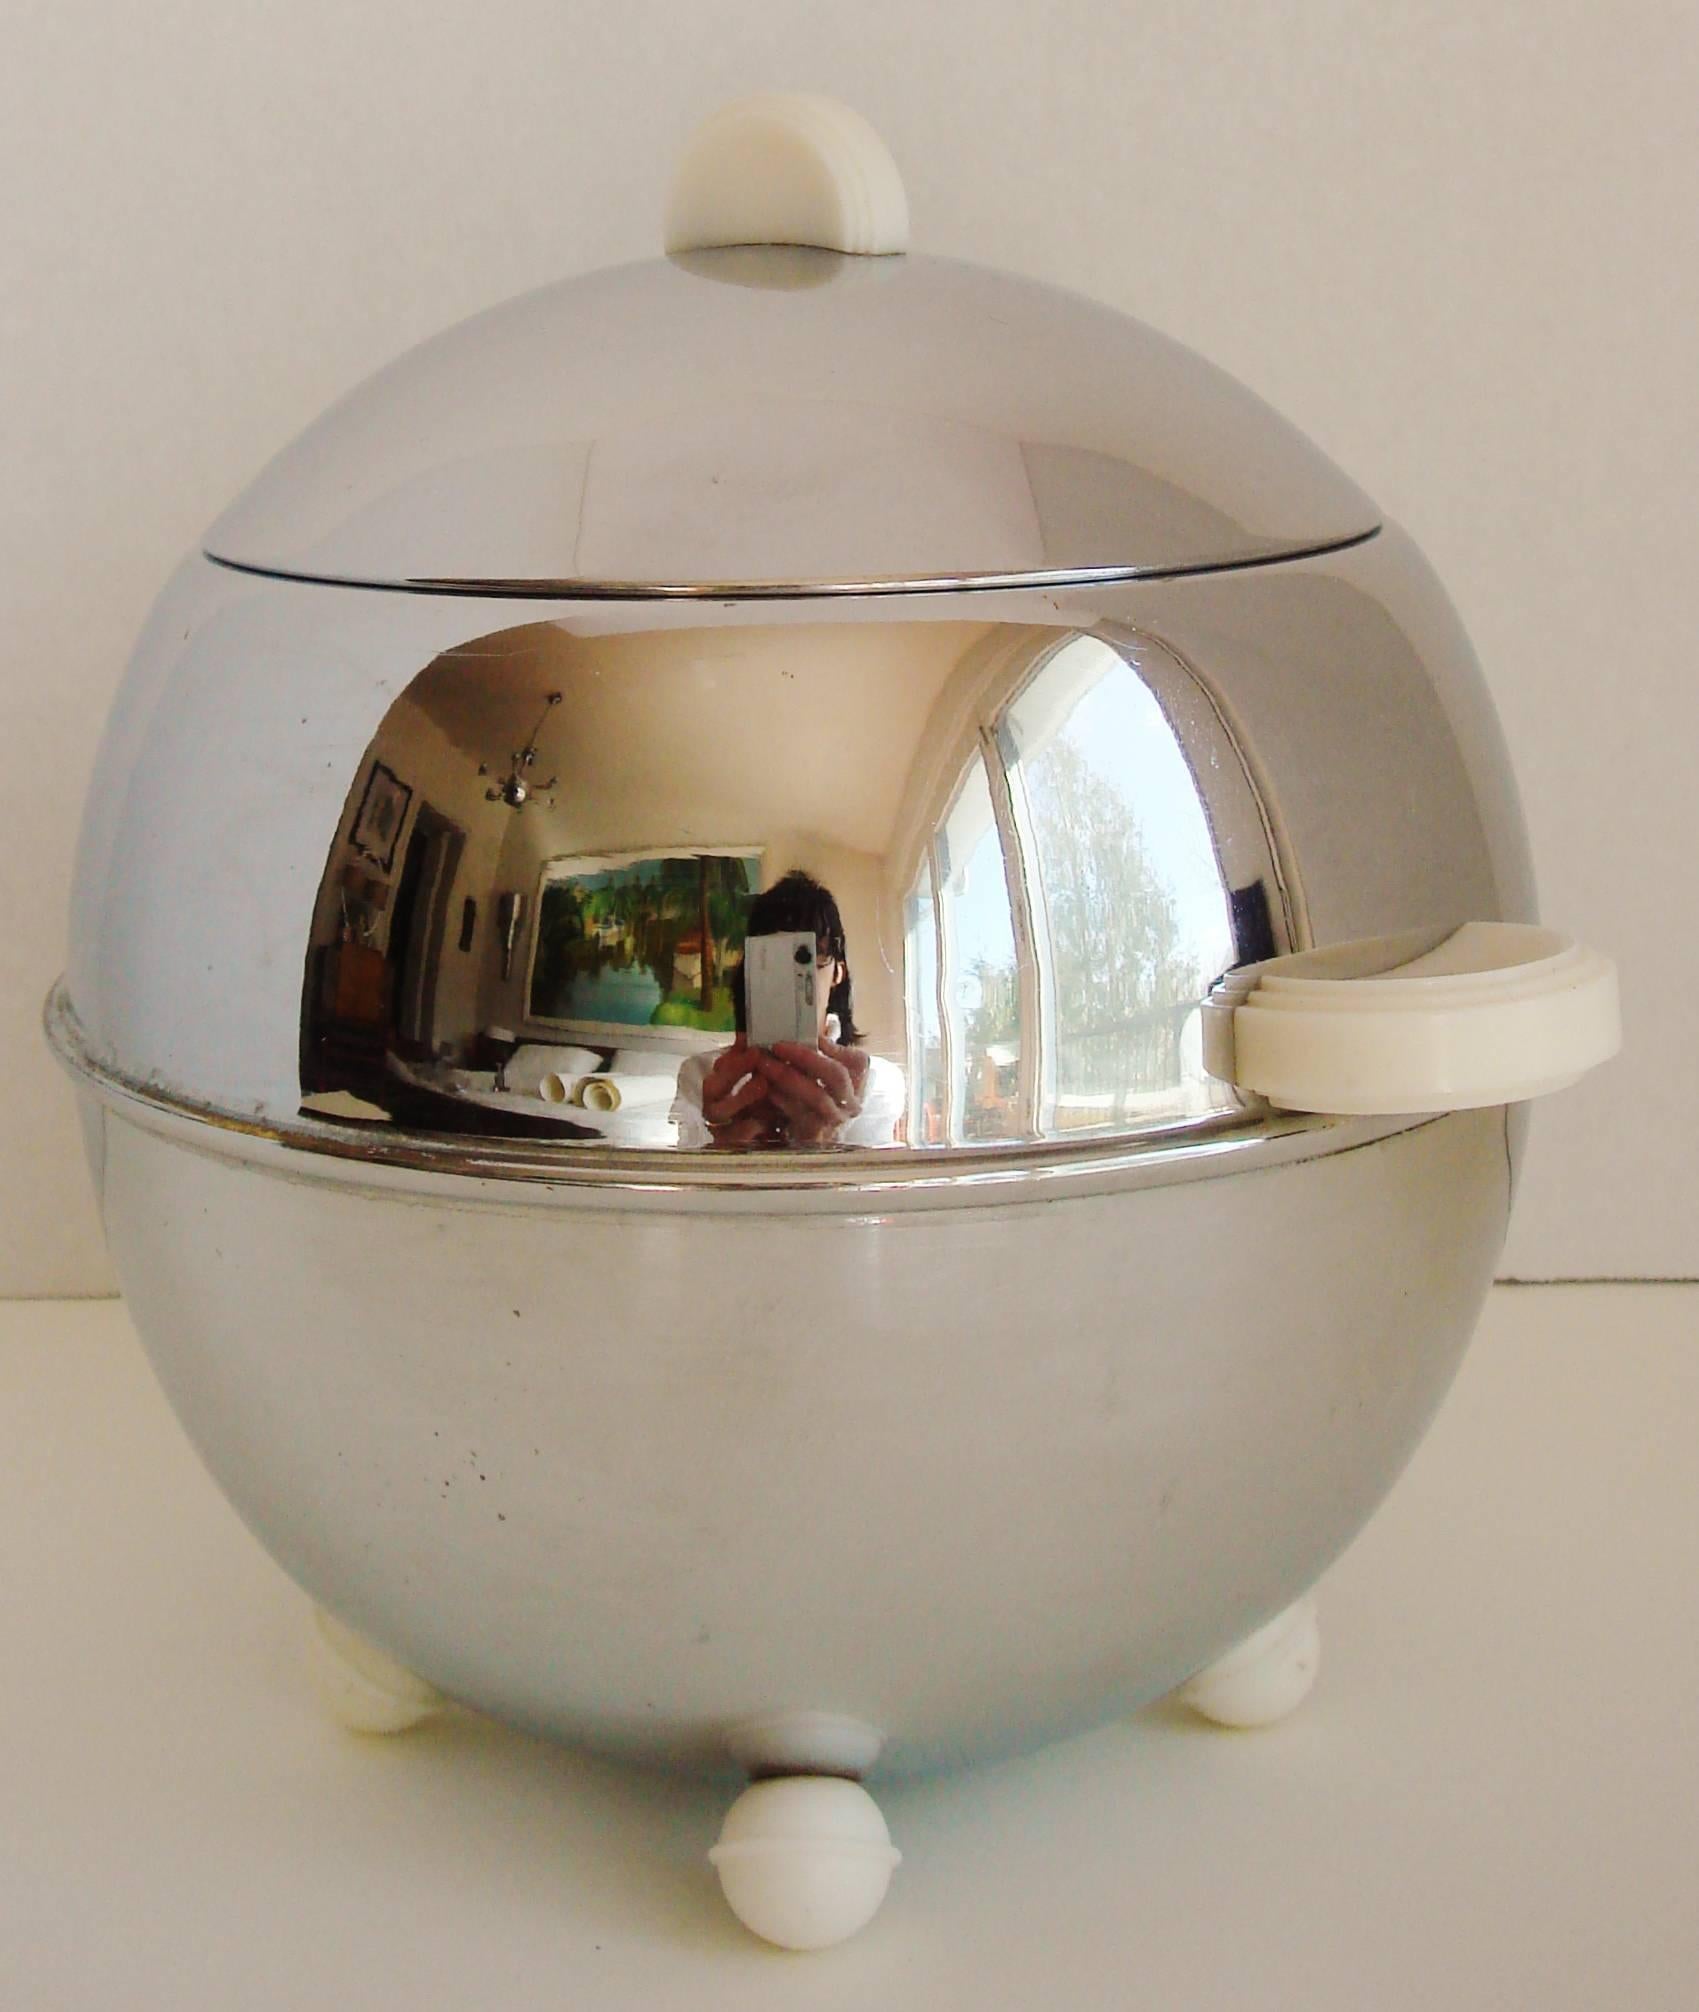 Rare English Mid-Century Modern Chrome Afternoon Tea Biscuit Barrel by P, B & B 1